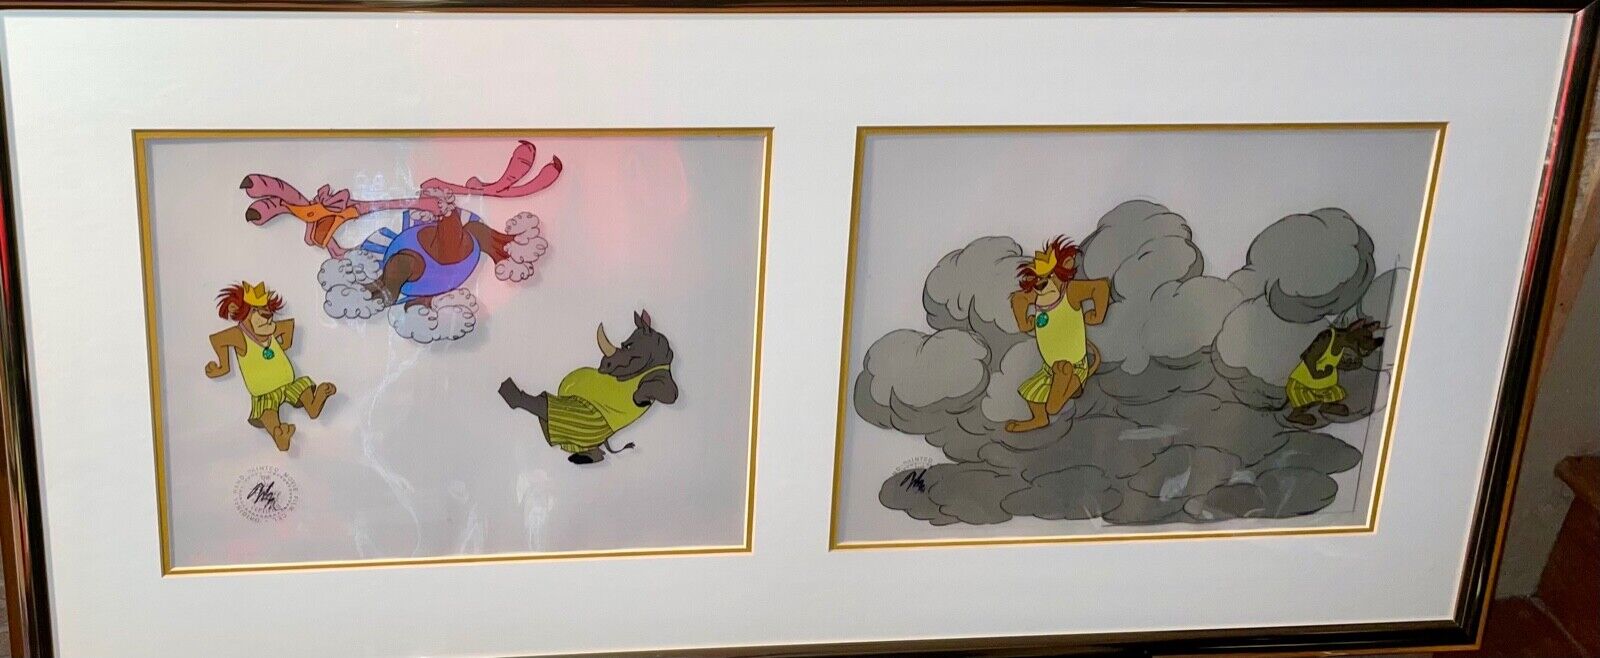 Disney Animation Cel Bedknobs And Broomsticks Original Production Vintage Cell 